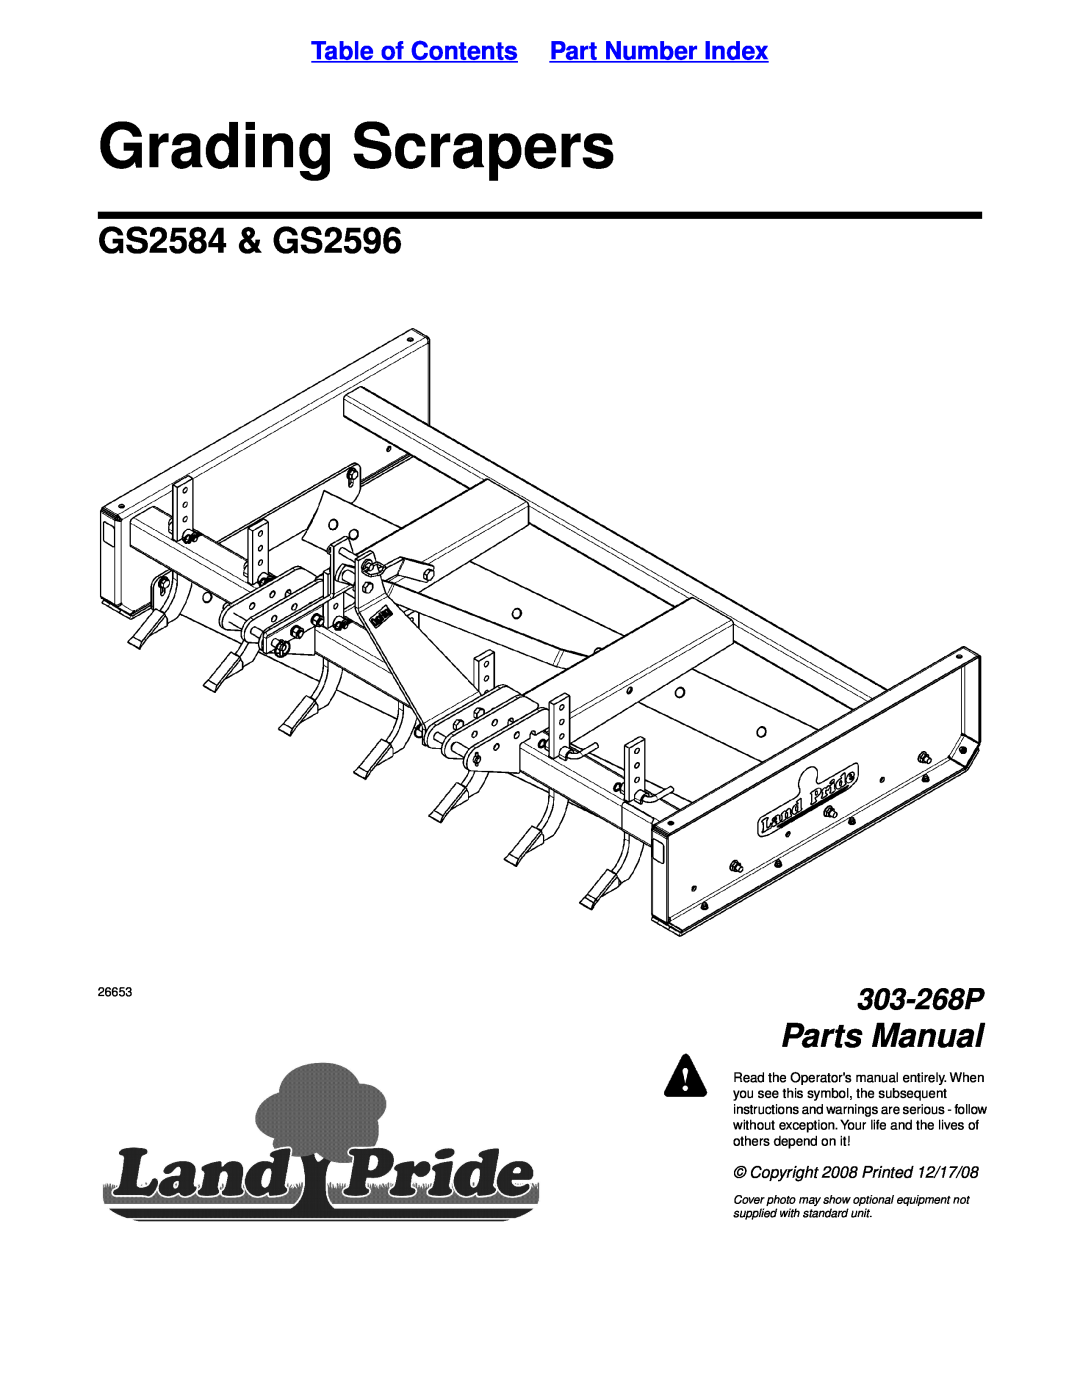 Land Pride manual Table of Contents Part Number Index, Grading Scrapers, GS2584 & GS2596, Parts Manual, 303-268P 